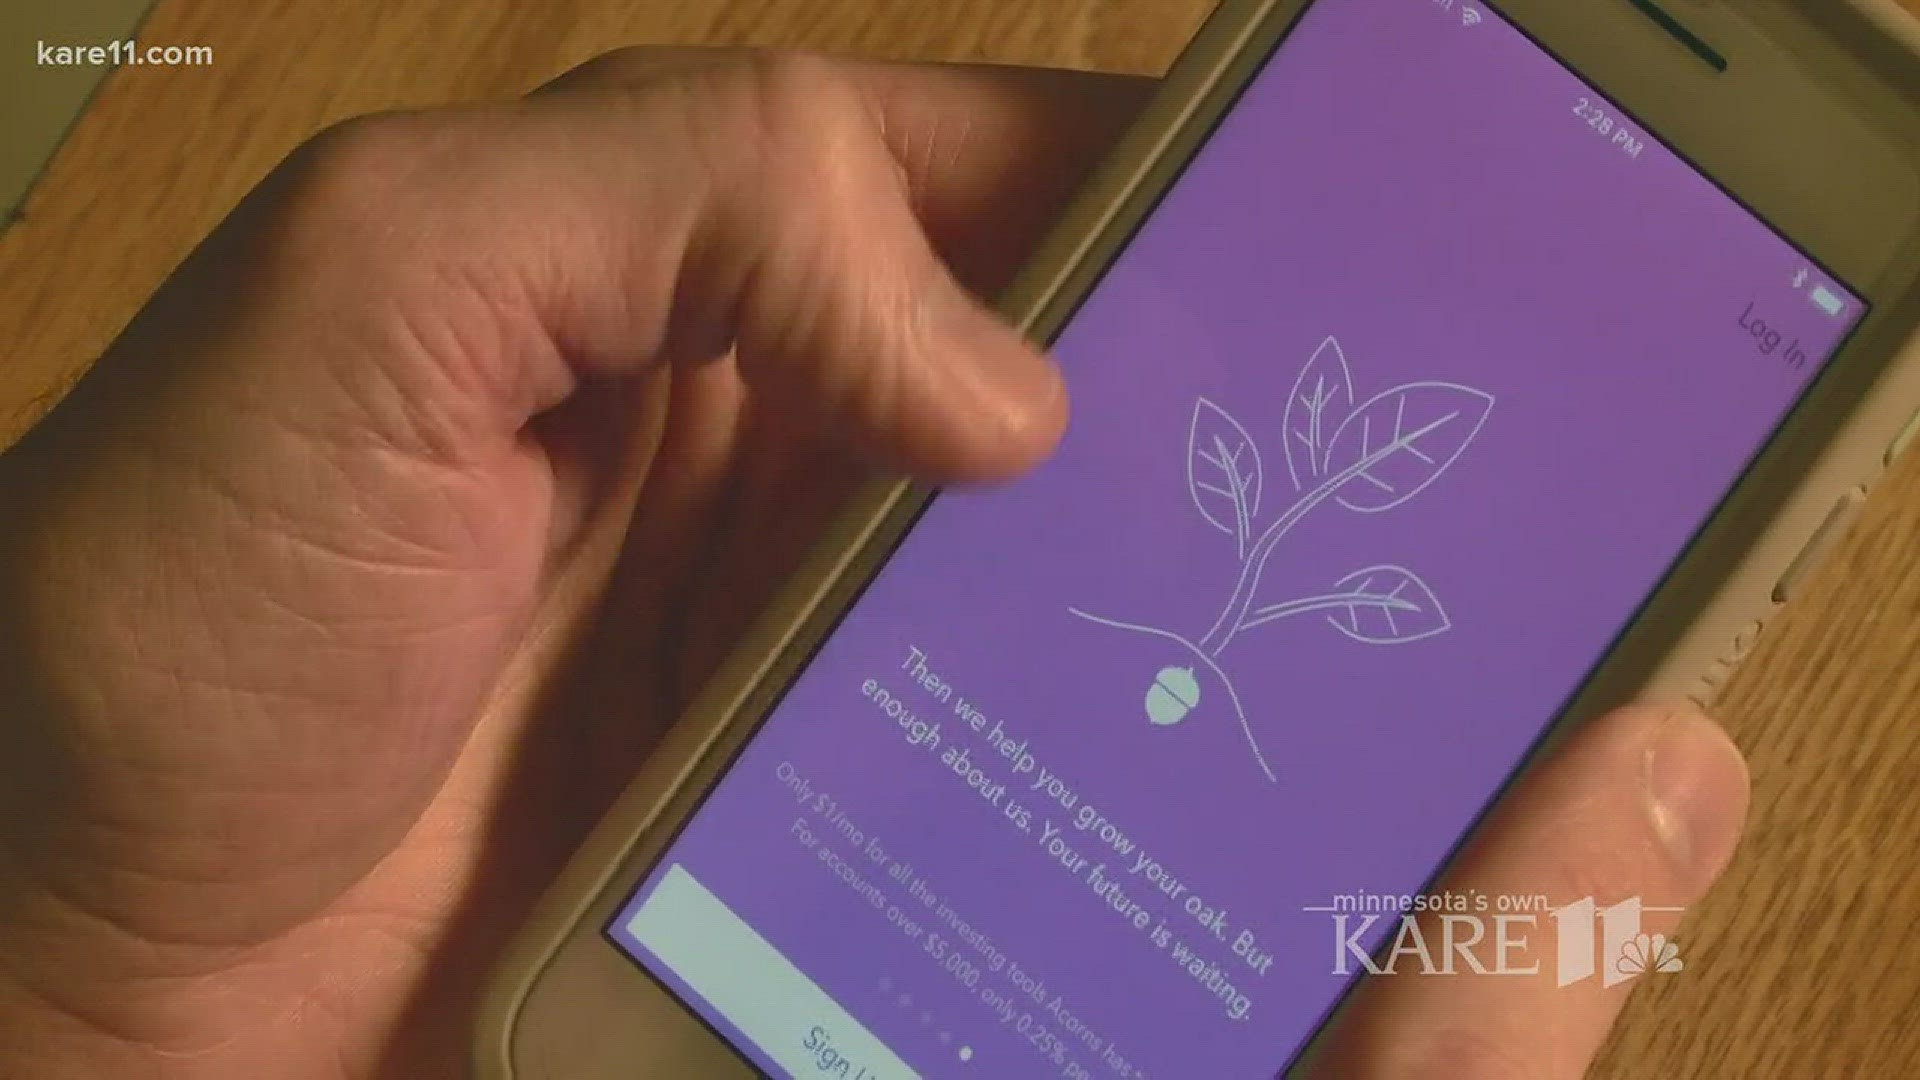 From basic budgeting to investment objectives, these apps can help you get your finances on track. http://kare11.tv/2GxqoMB